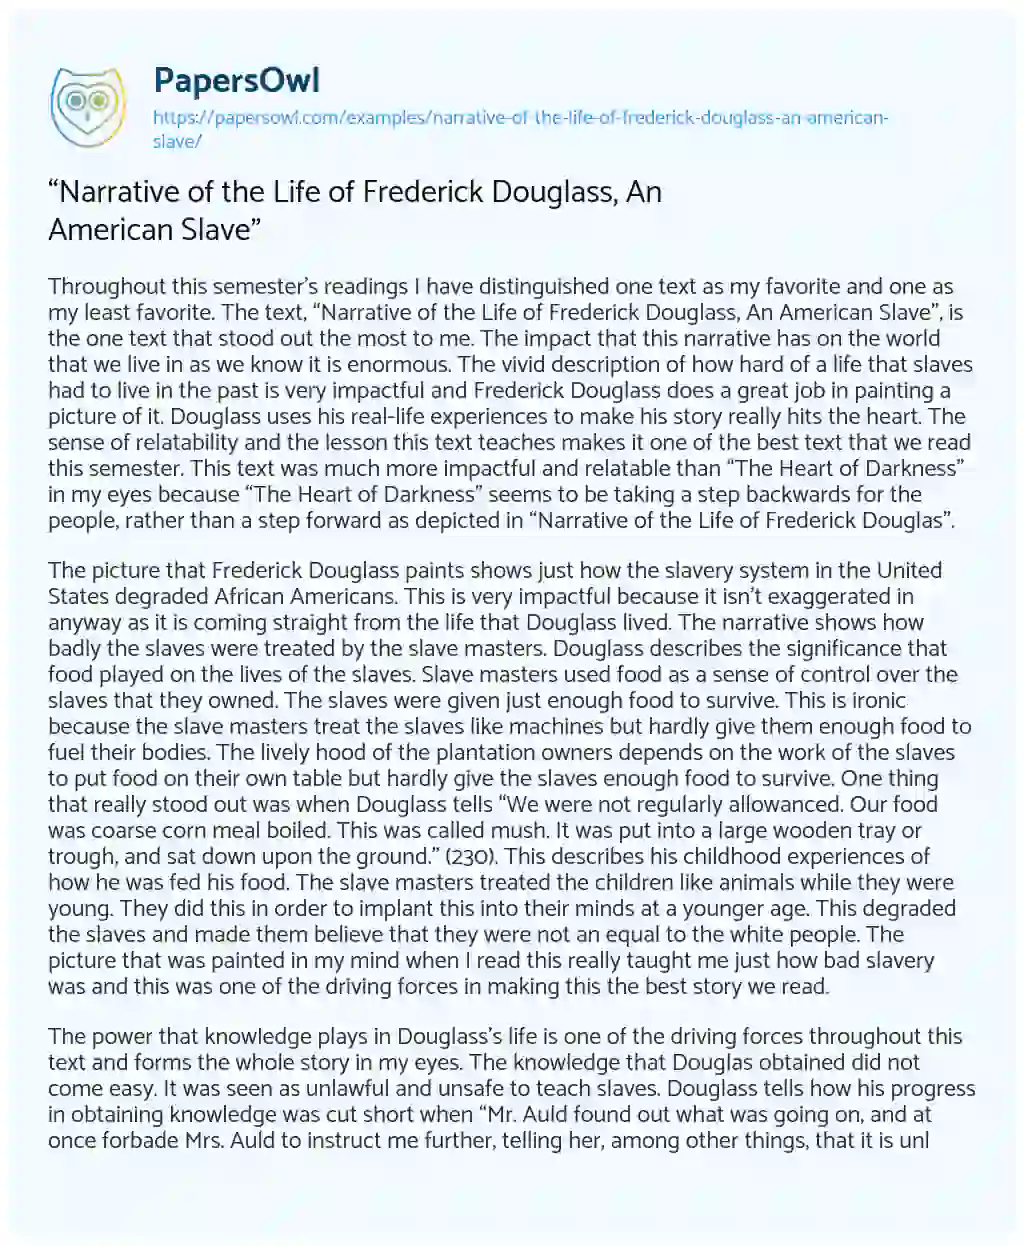 “Narrative of the Life of Frederick Douglass, an American Slave” essay